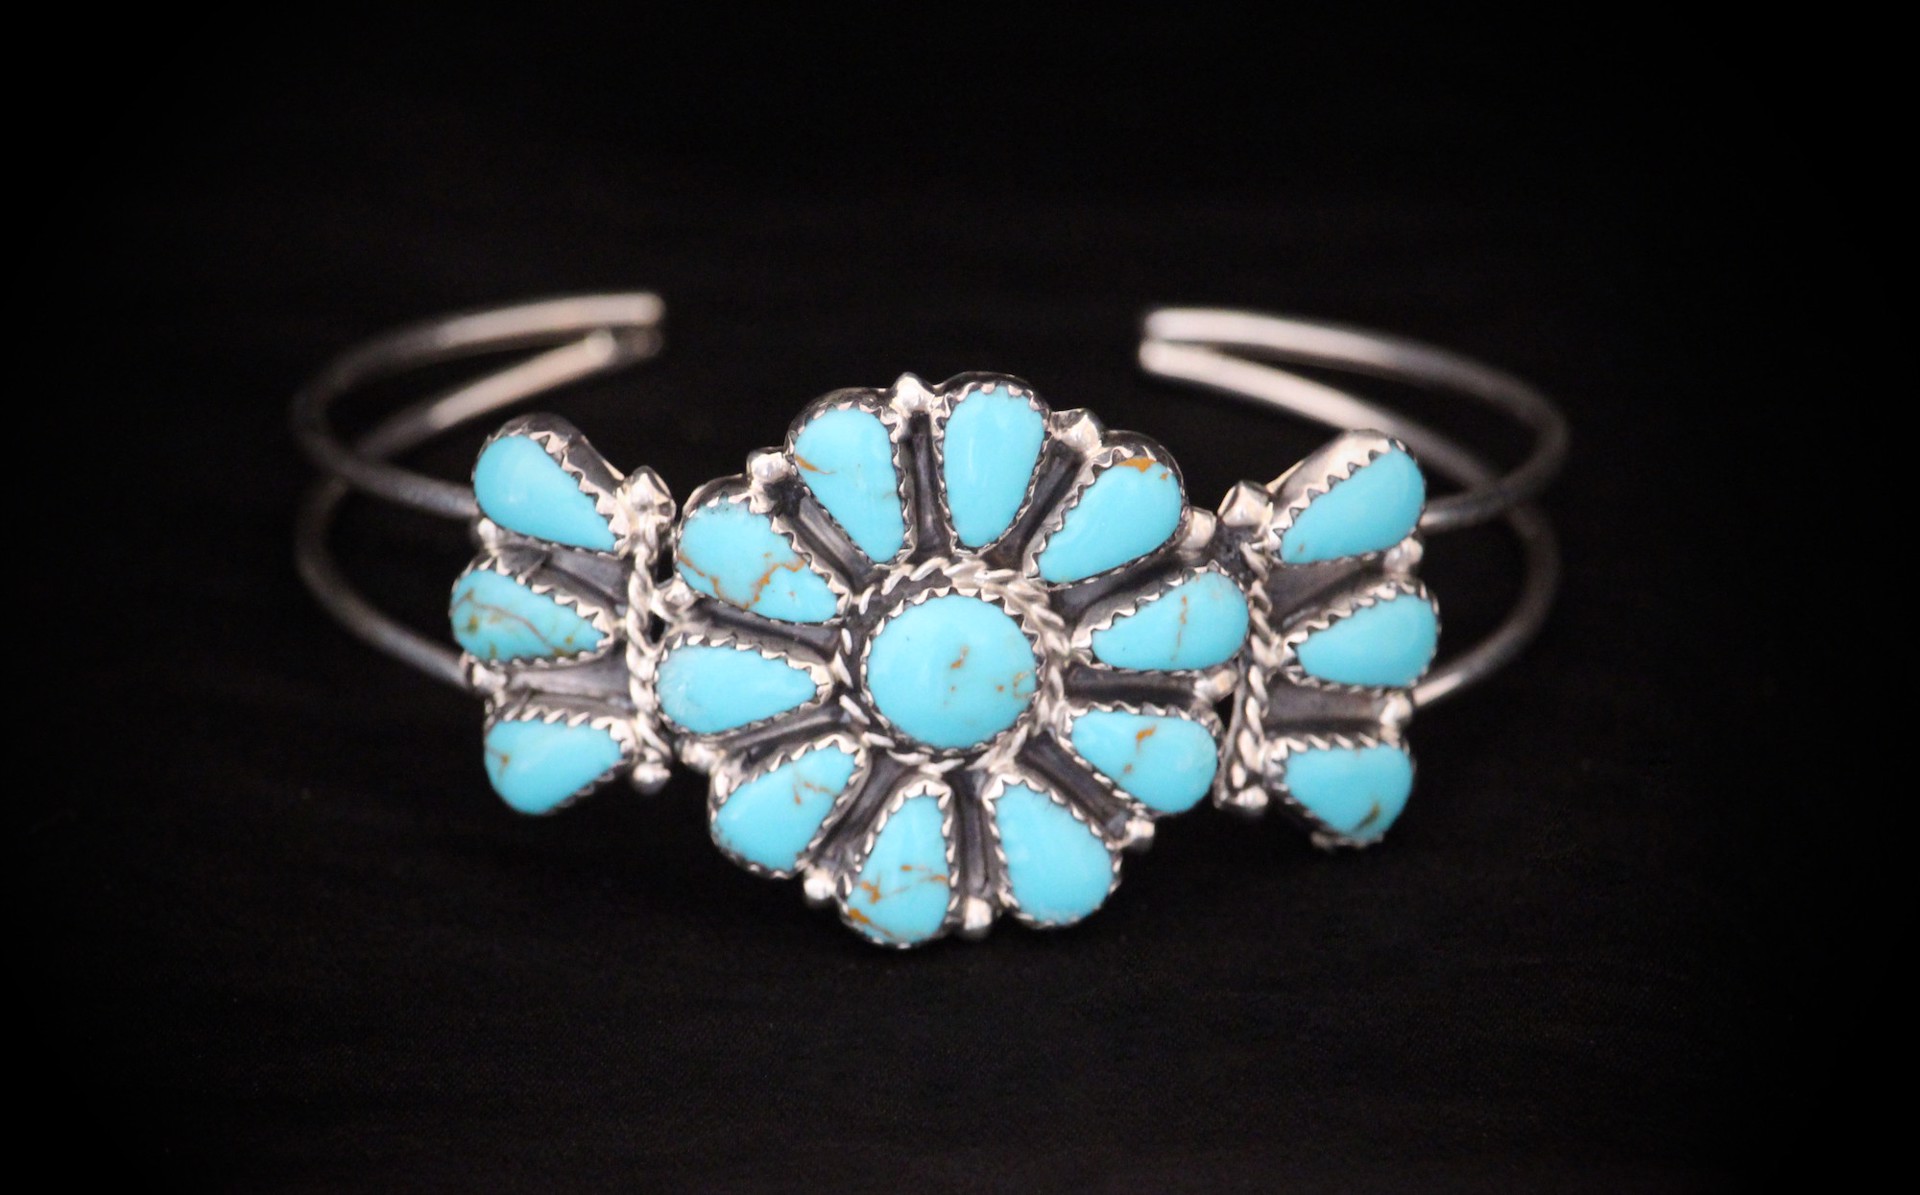 Turquoise Blossom Cuff Bracelet by M Begay